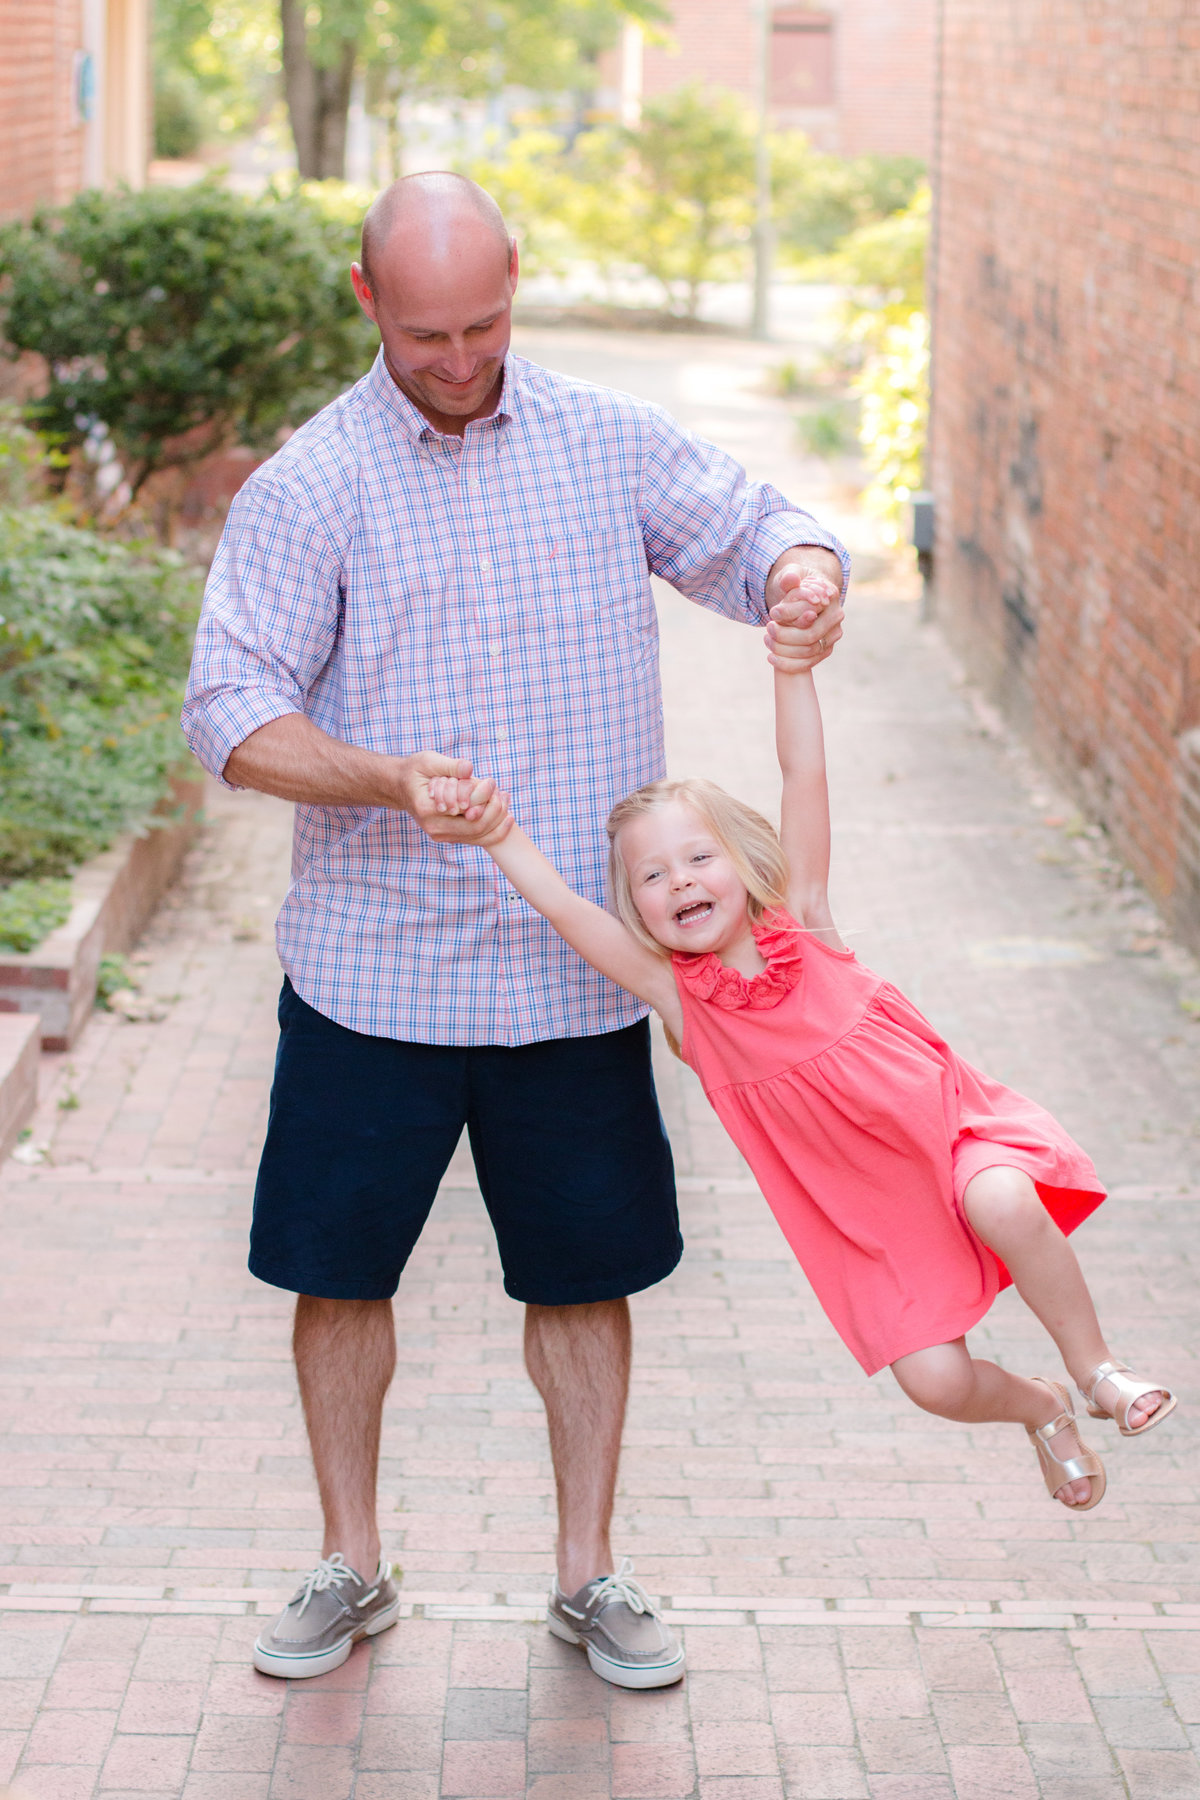 Photography by Tiffany - Southern Pines Family Photo Session NC Photographer  - June 07, 2015 - 2